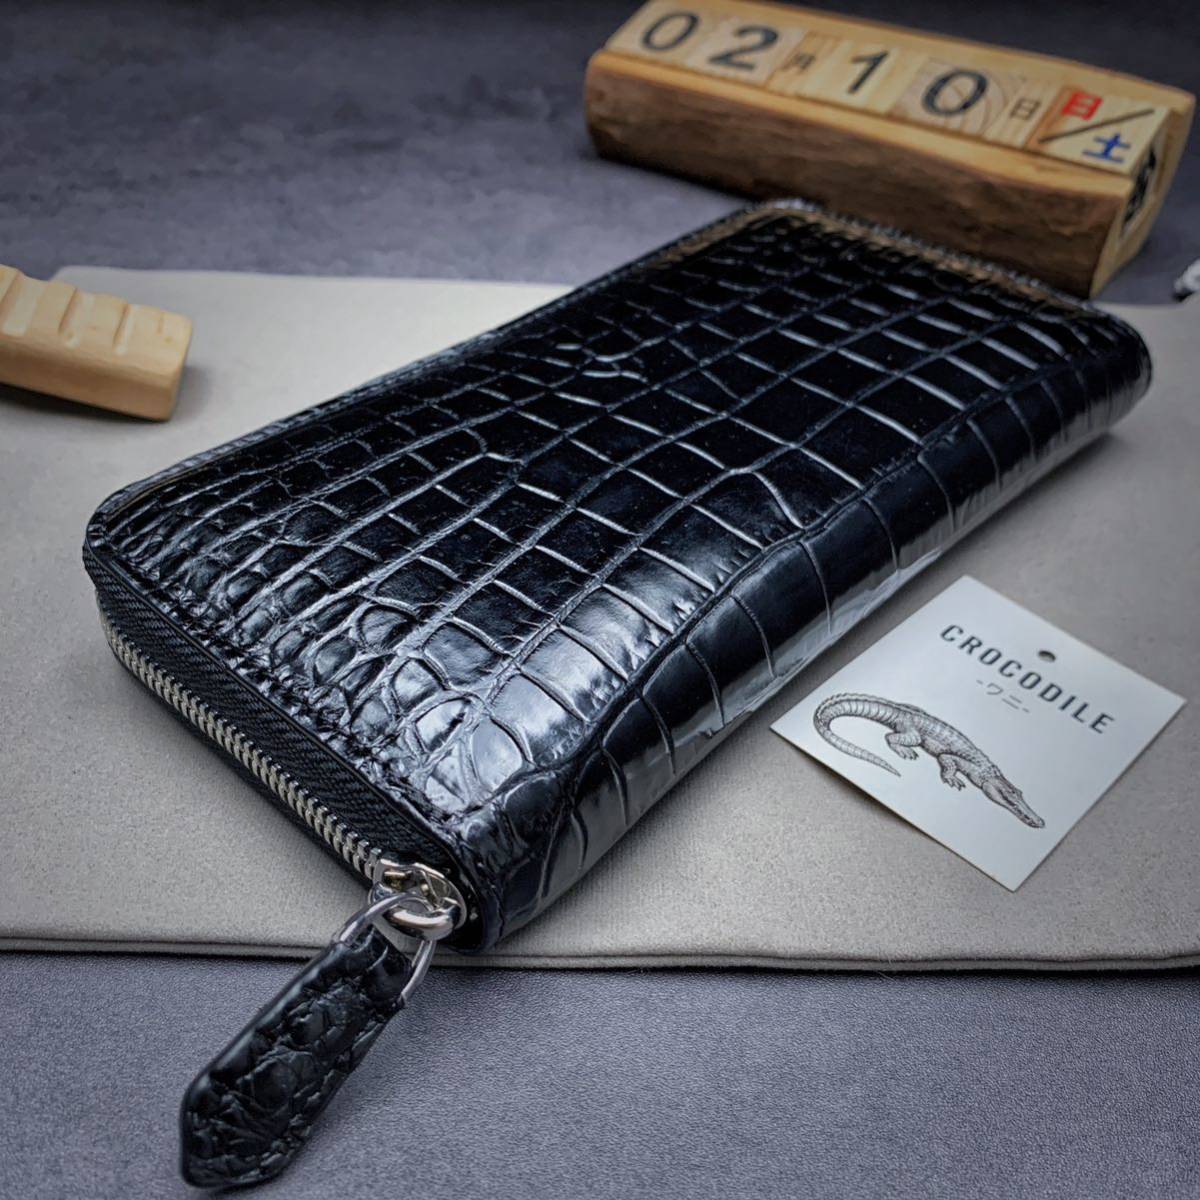  standard [ center one sheets leather ] crocodile wani leather long wallet round fastener genuine article guarantee . leather use change purse . equipped . leather business purse the truth thing photograph 